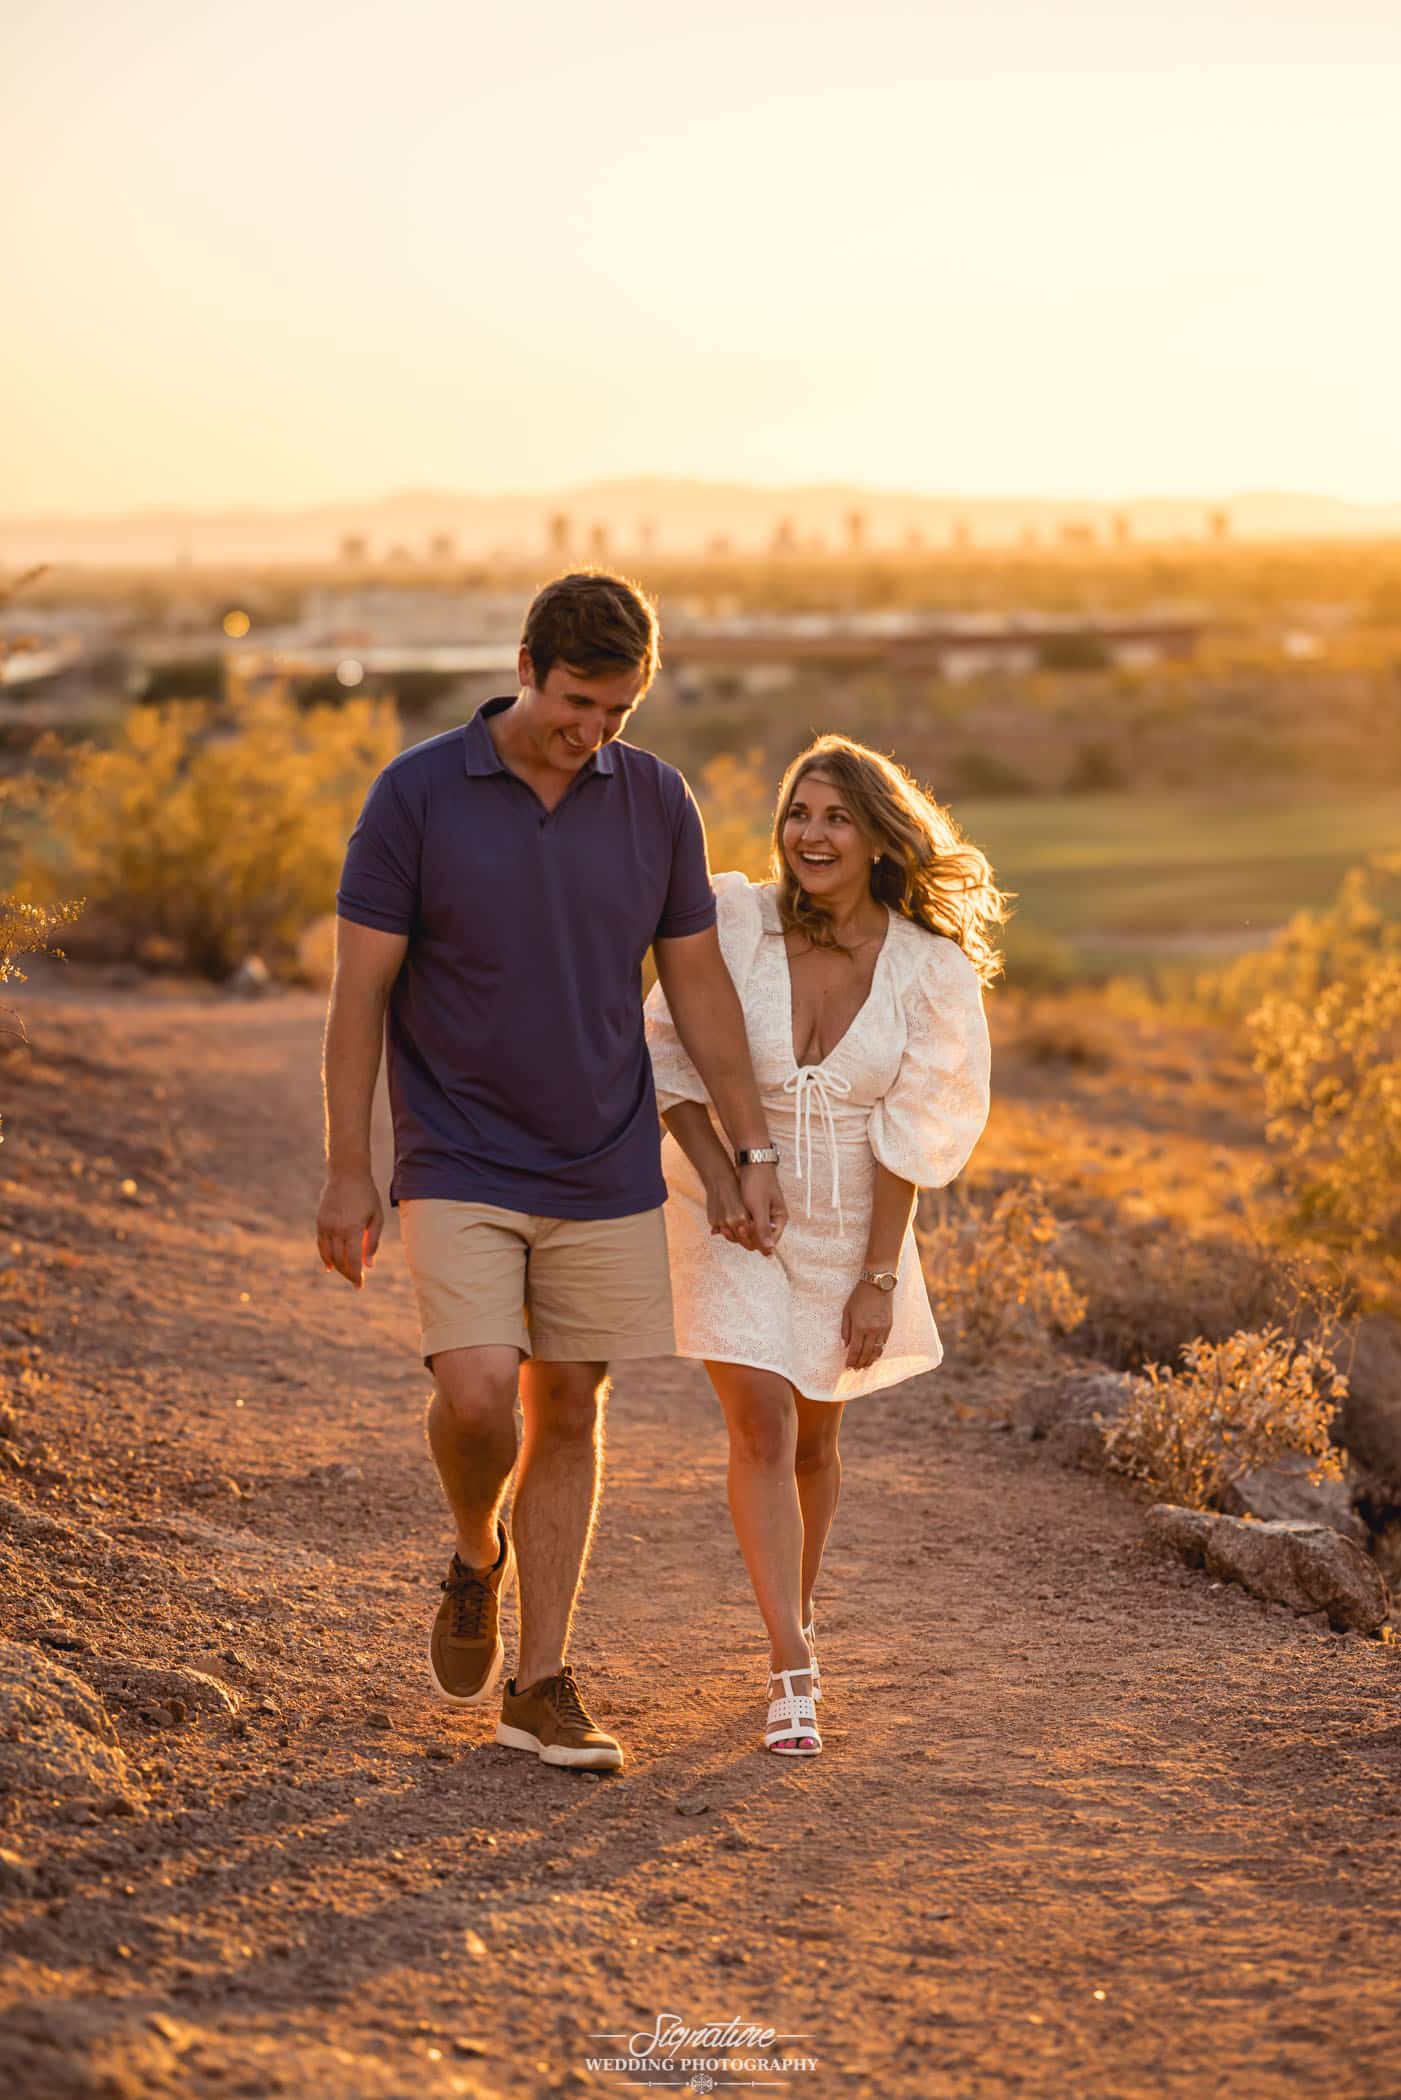 Engaged couple holding hands walking on desert path